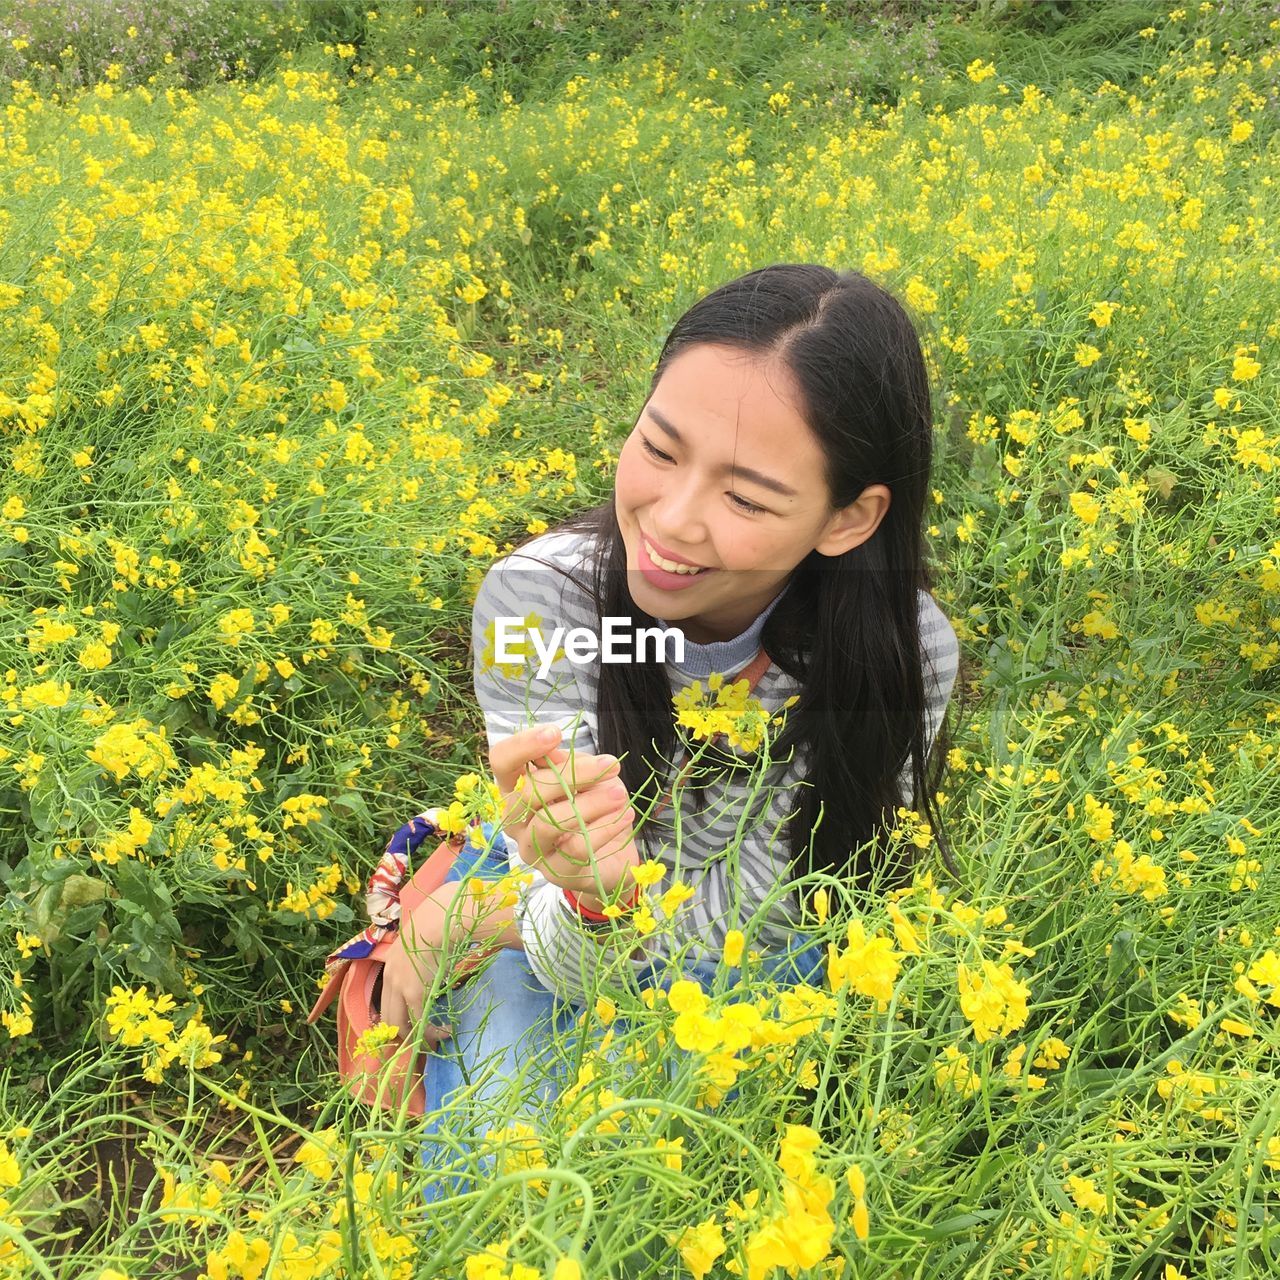 BEAUTIFUL YOUNG WOMAN ON YELLOW FLOWER FIELD